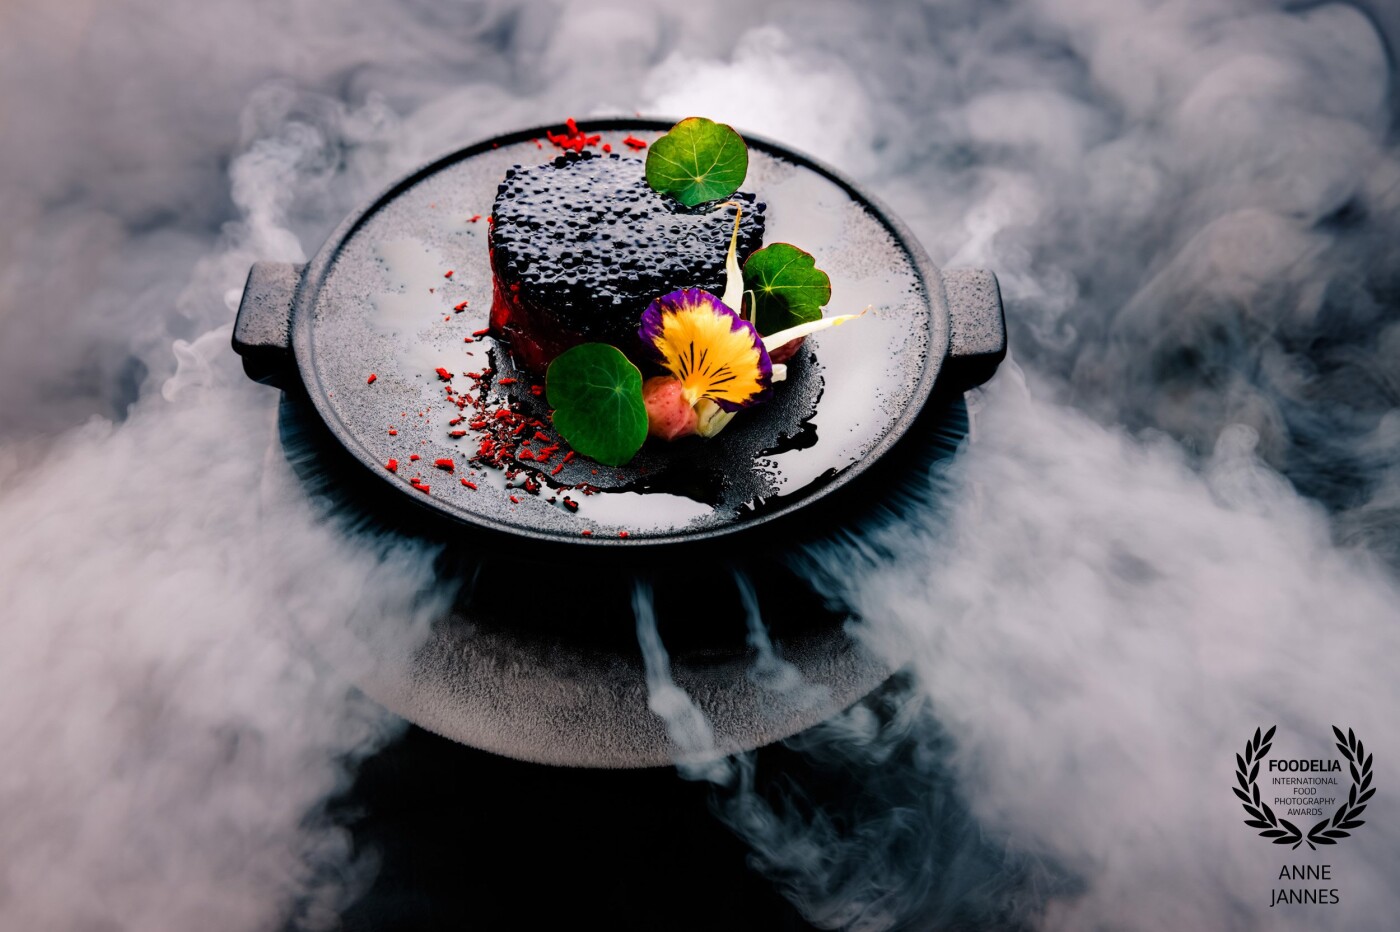 This dish was made by de chef of restaurant Sjalotte. They have a living room style restaurant and you feel at home from the moment you walk in. This dish had some dry-ice involved.